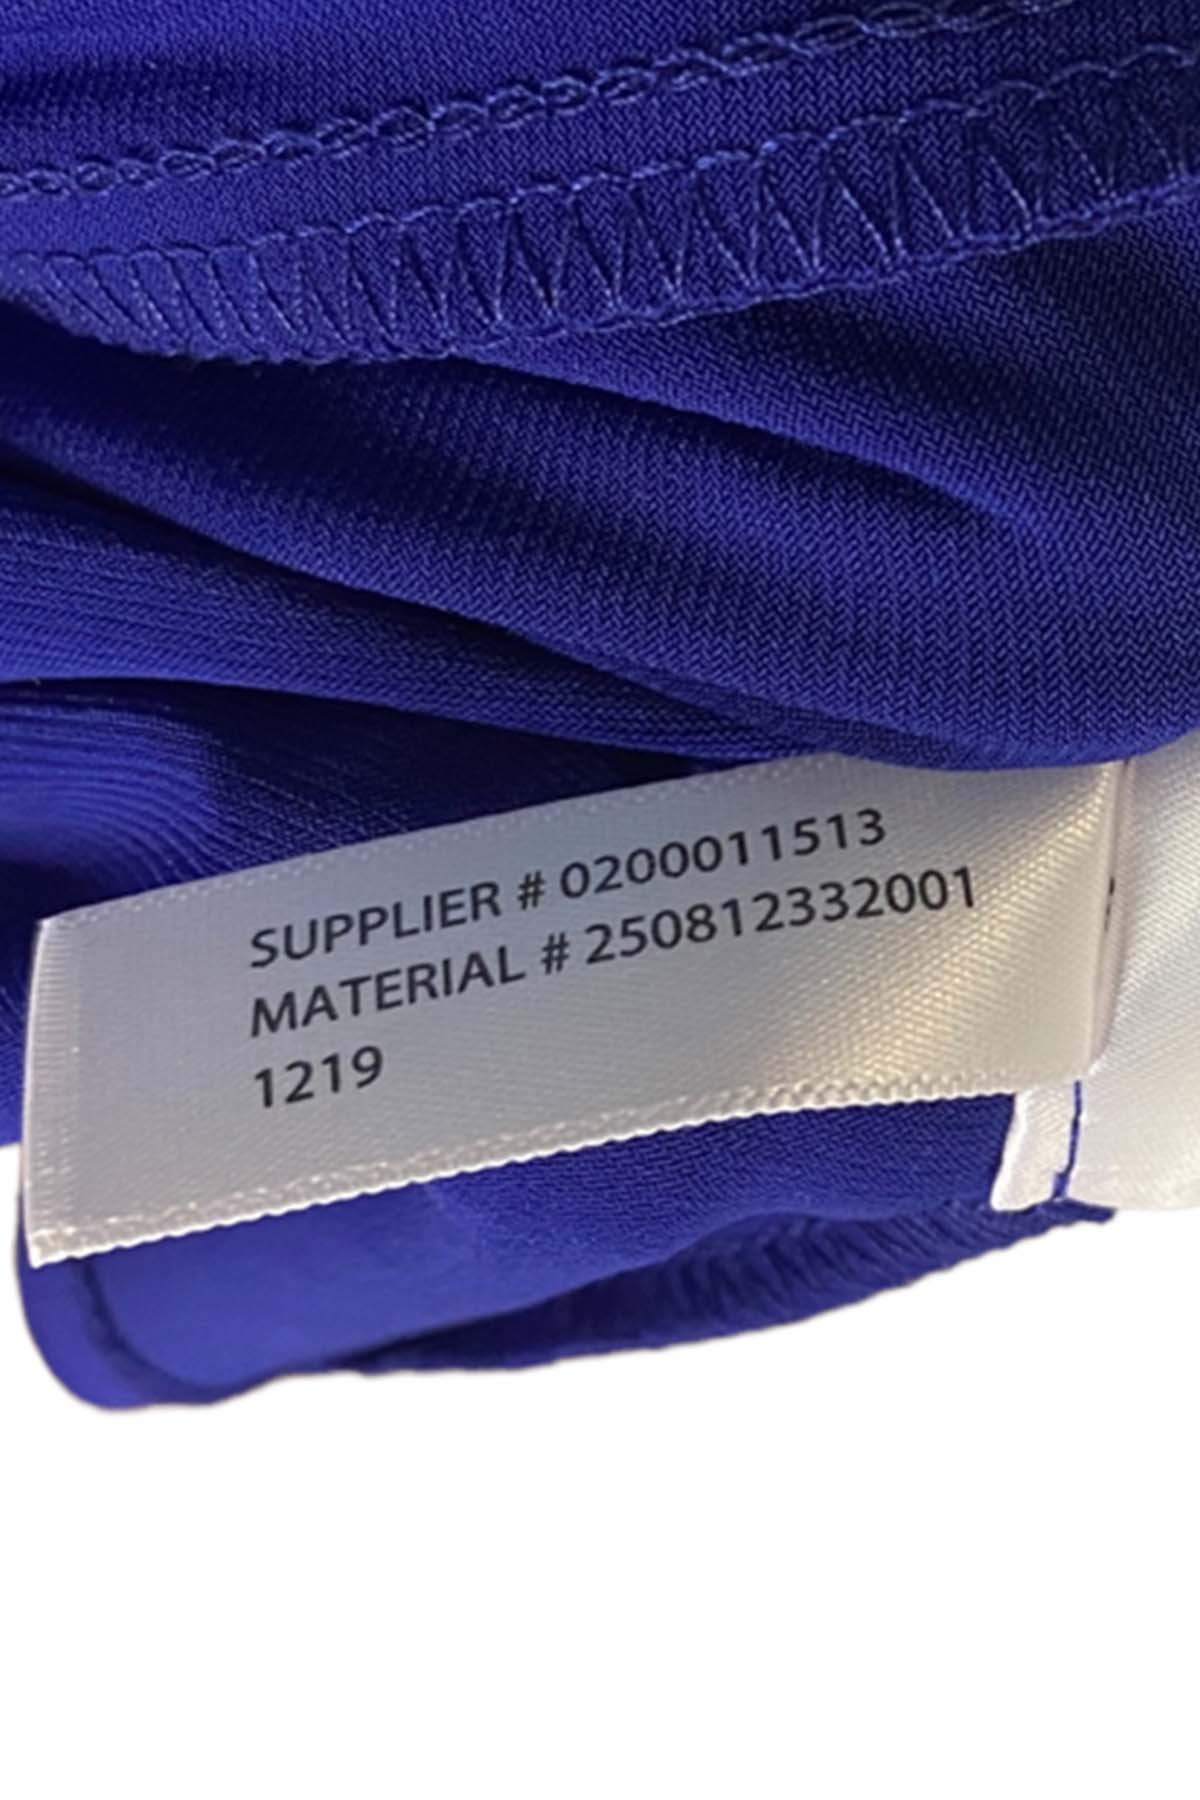 a close up picture of a ralph lauren product code tag.